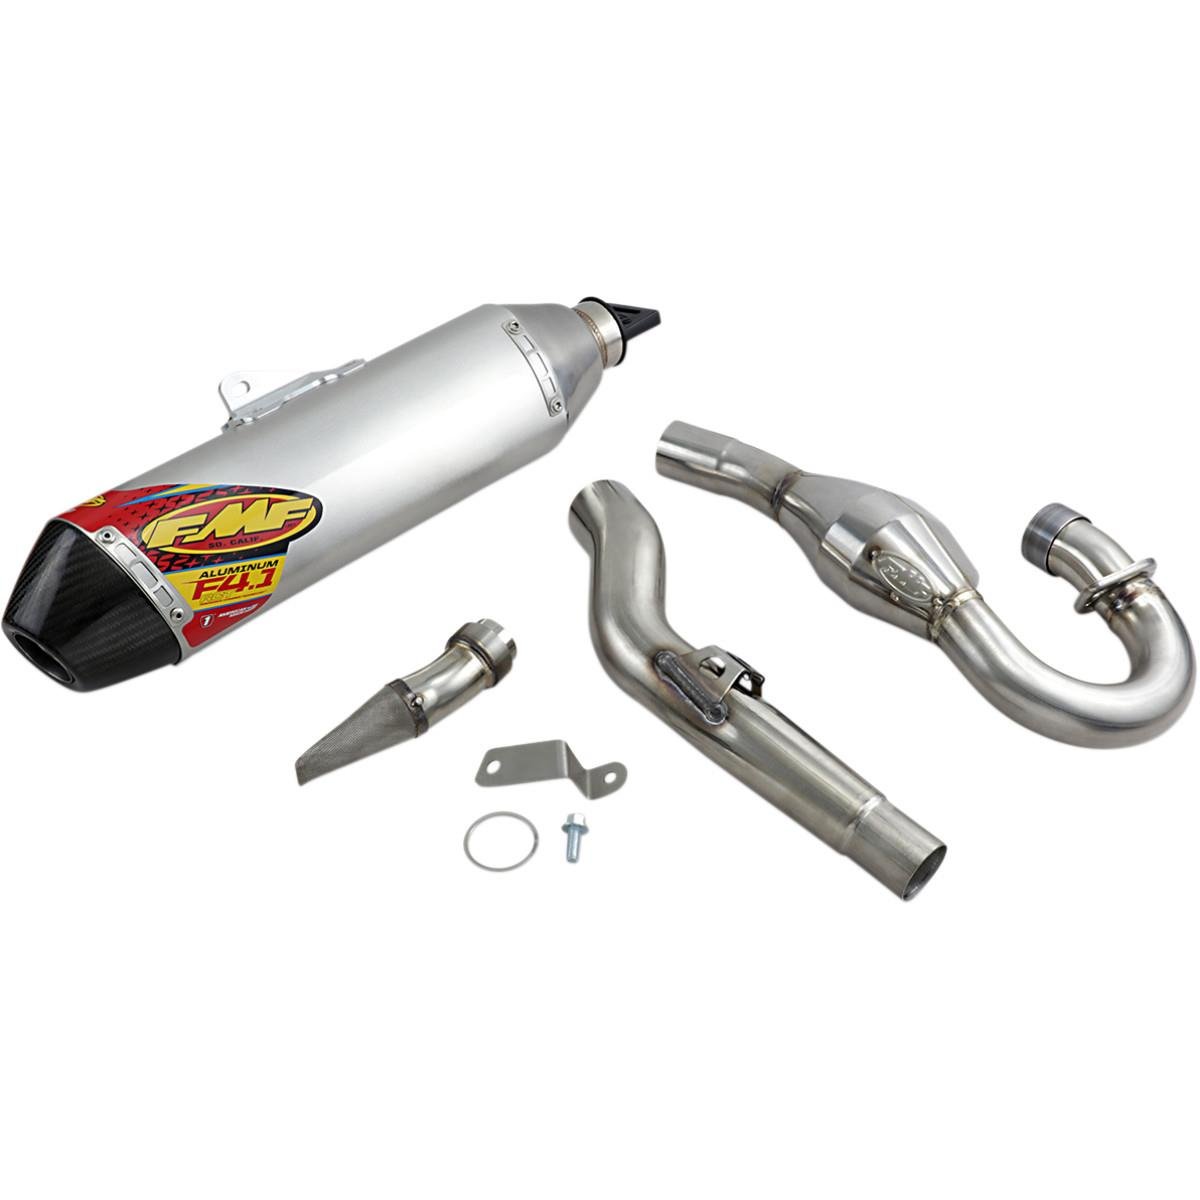 FMF Ligne complète Factory 4.1 RCT Stainless Kawasaki KX 450F 19-